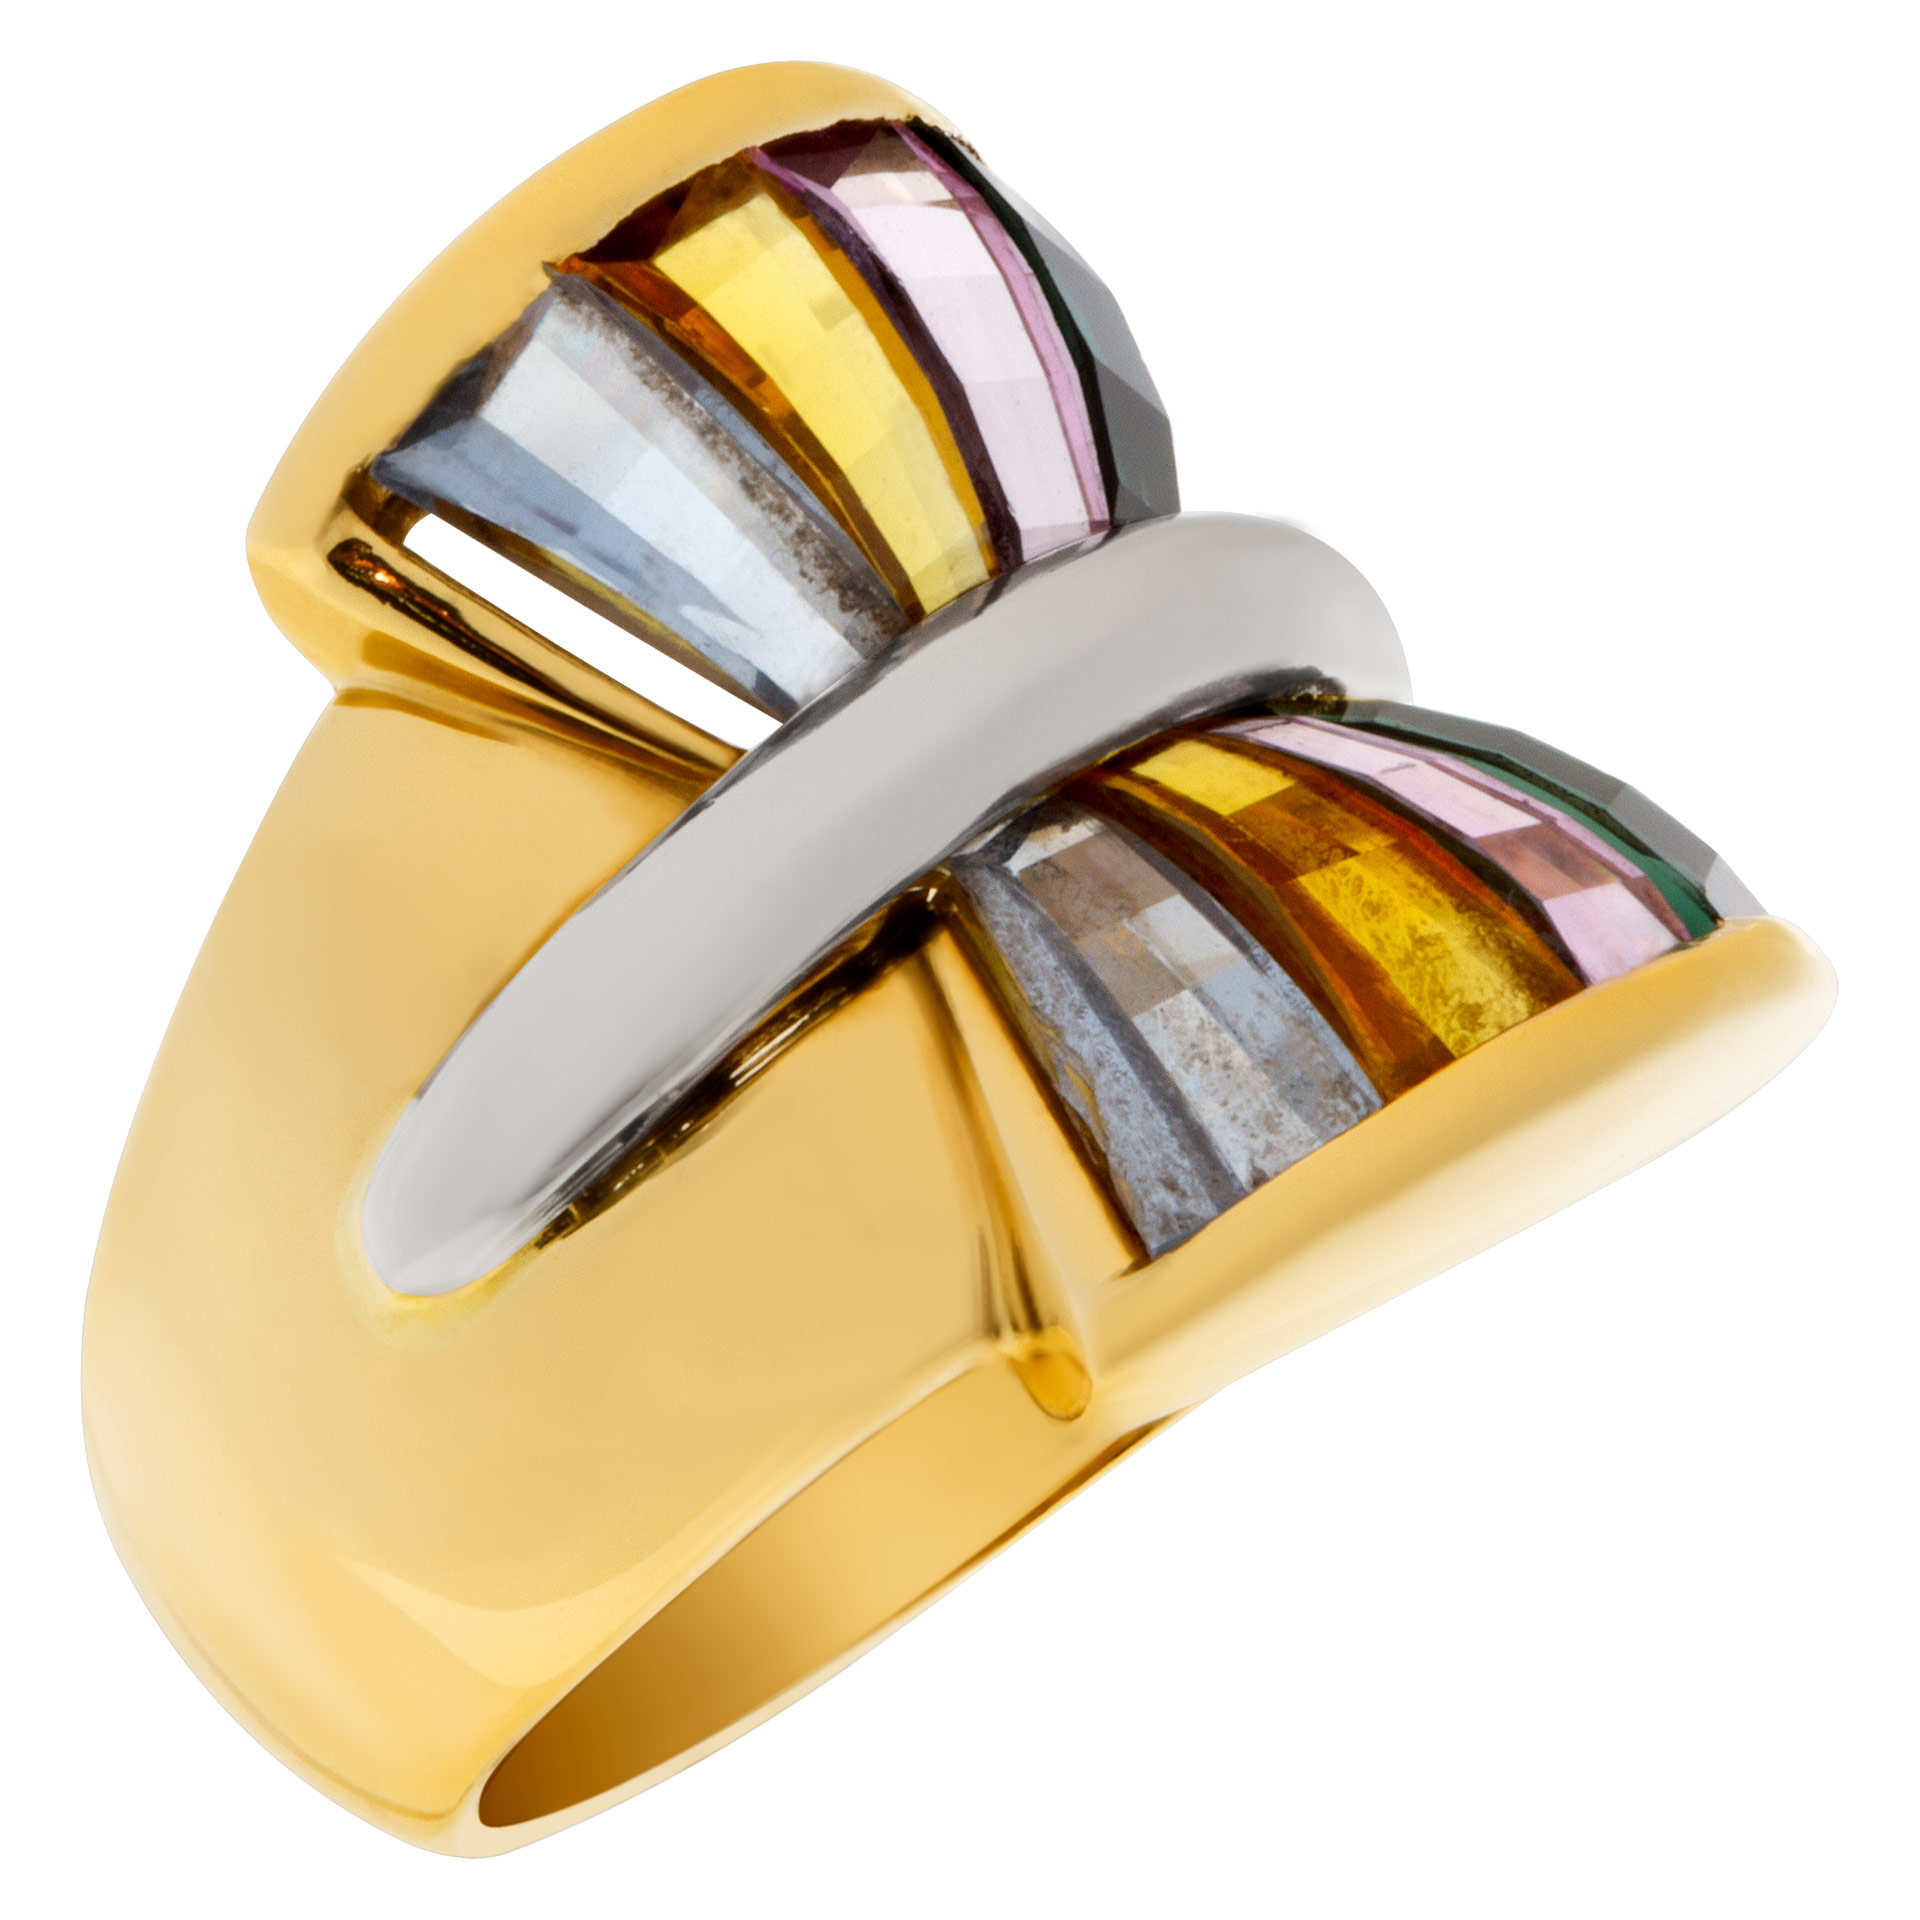 "Colorful Fan" tapered baguette cut colorful semi-precious stone ring in 14k image 4